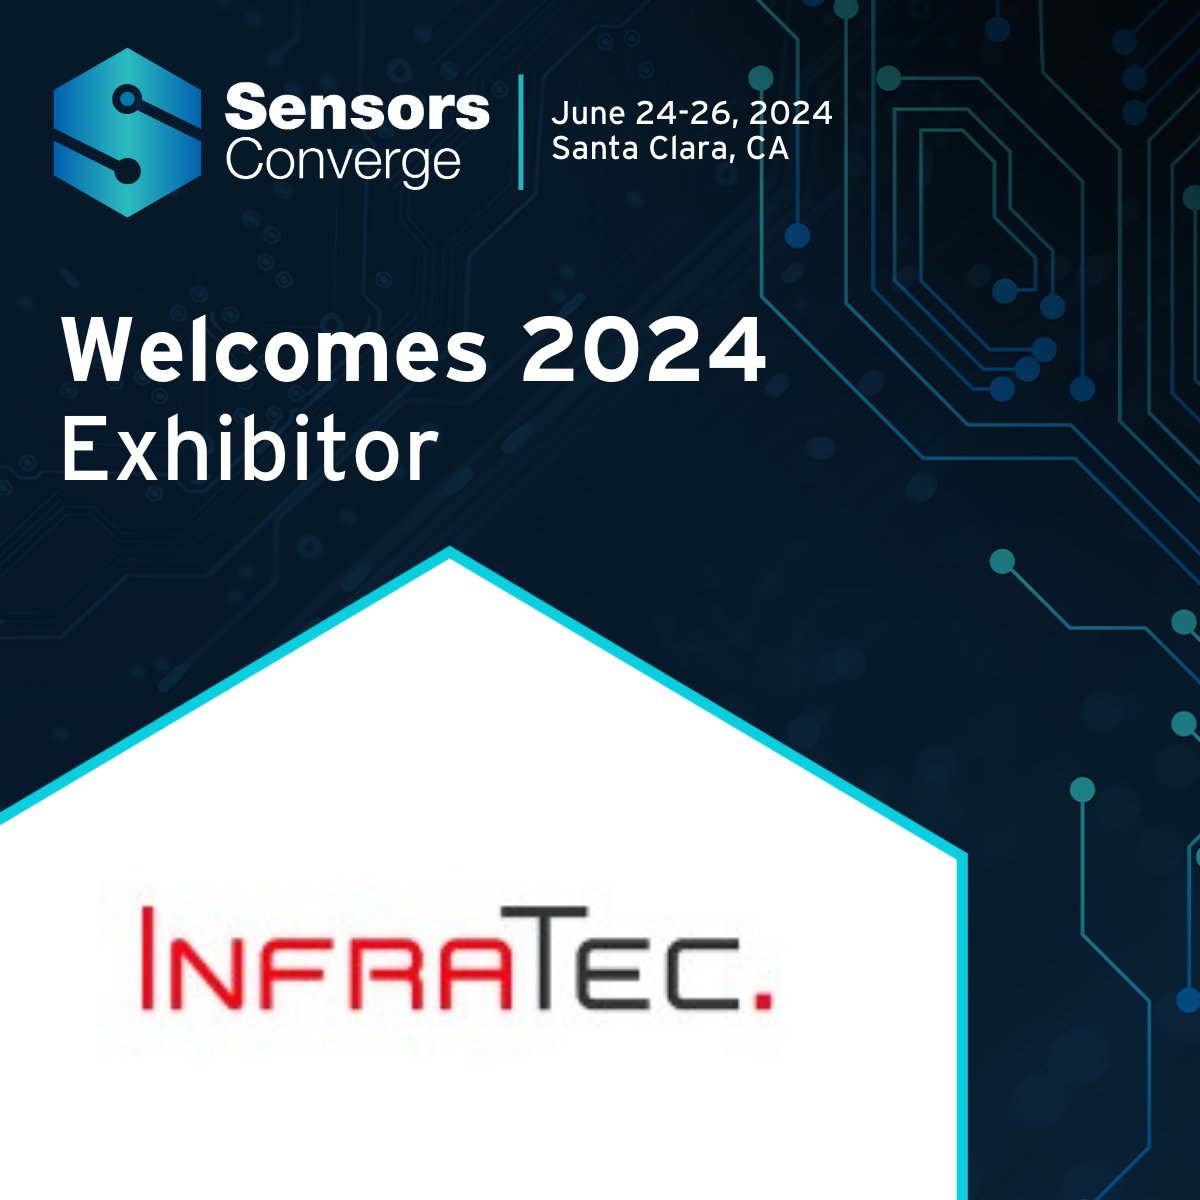 Welcome InfraTec Infrared to #SensorsConverge! InfraTec produces custom-made components for gas analysis, fire and flame sensors and spectroscopy. Learn more: infratec-infrared.com Register now and join us this June 24-26 in Santa Clara! sensorsconverge.com/sensorsconverg… #sensors